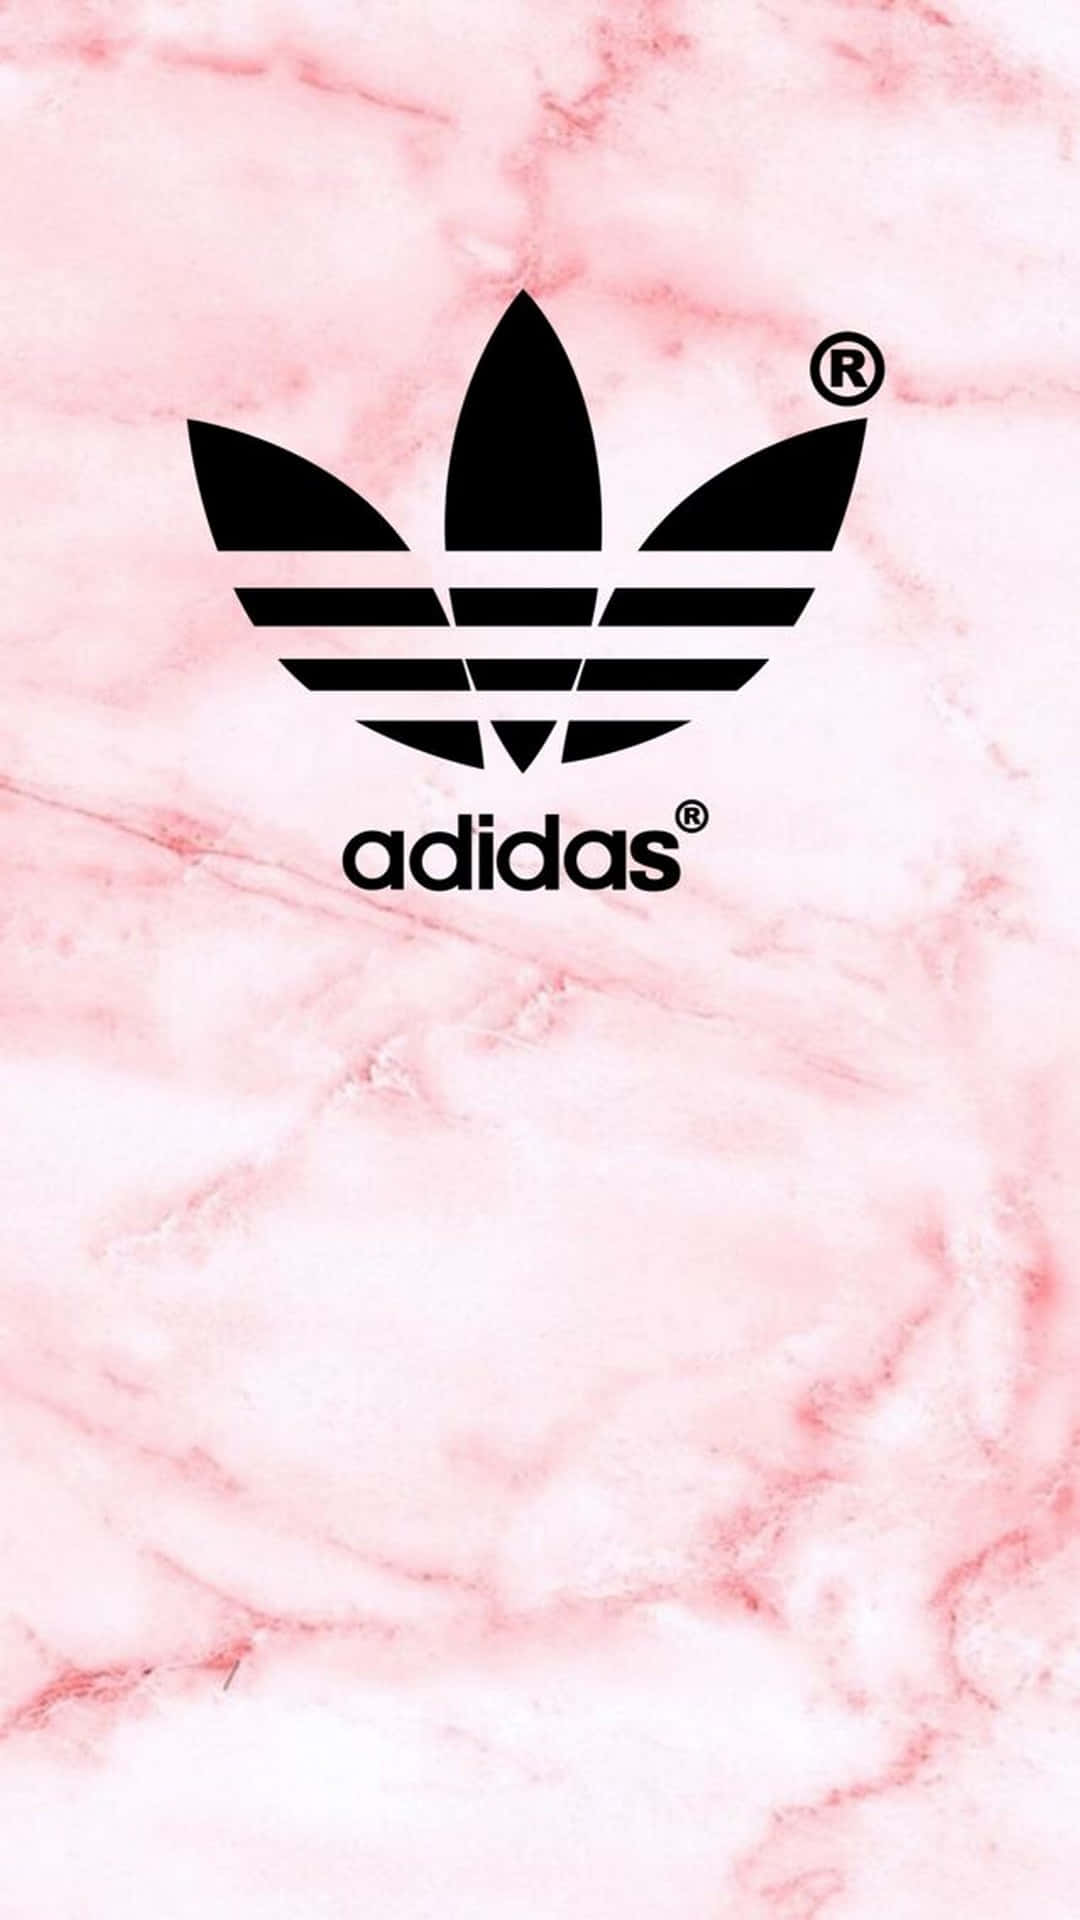 Adidas Logo On A Pink Marble Background Wallpaper